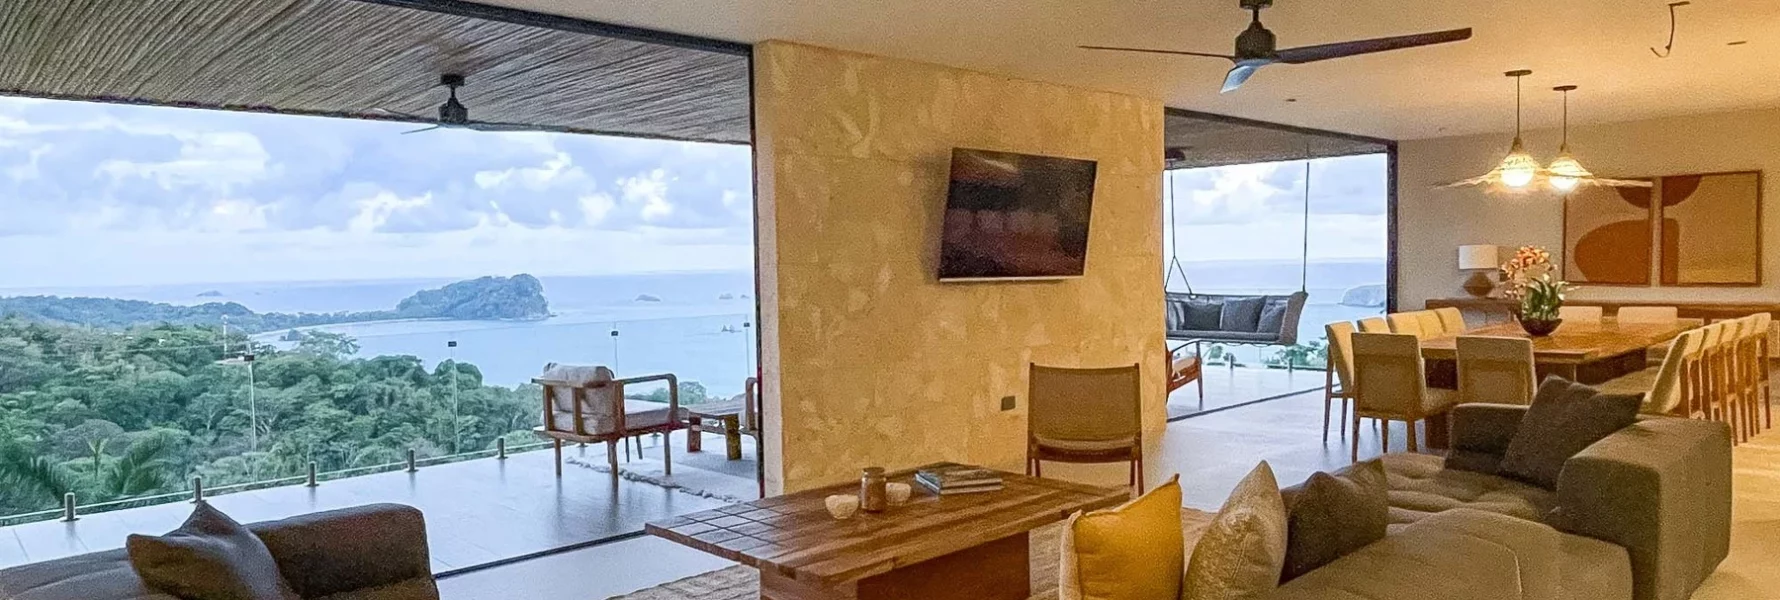 The ocean view from the relaxing open-plan living area is simply breathtaking.